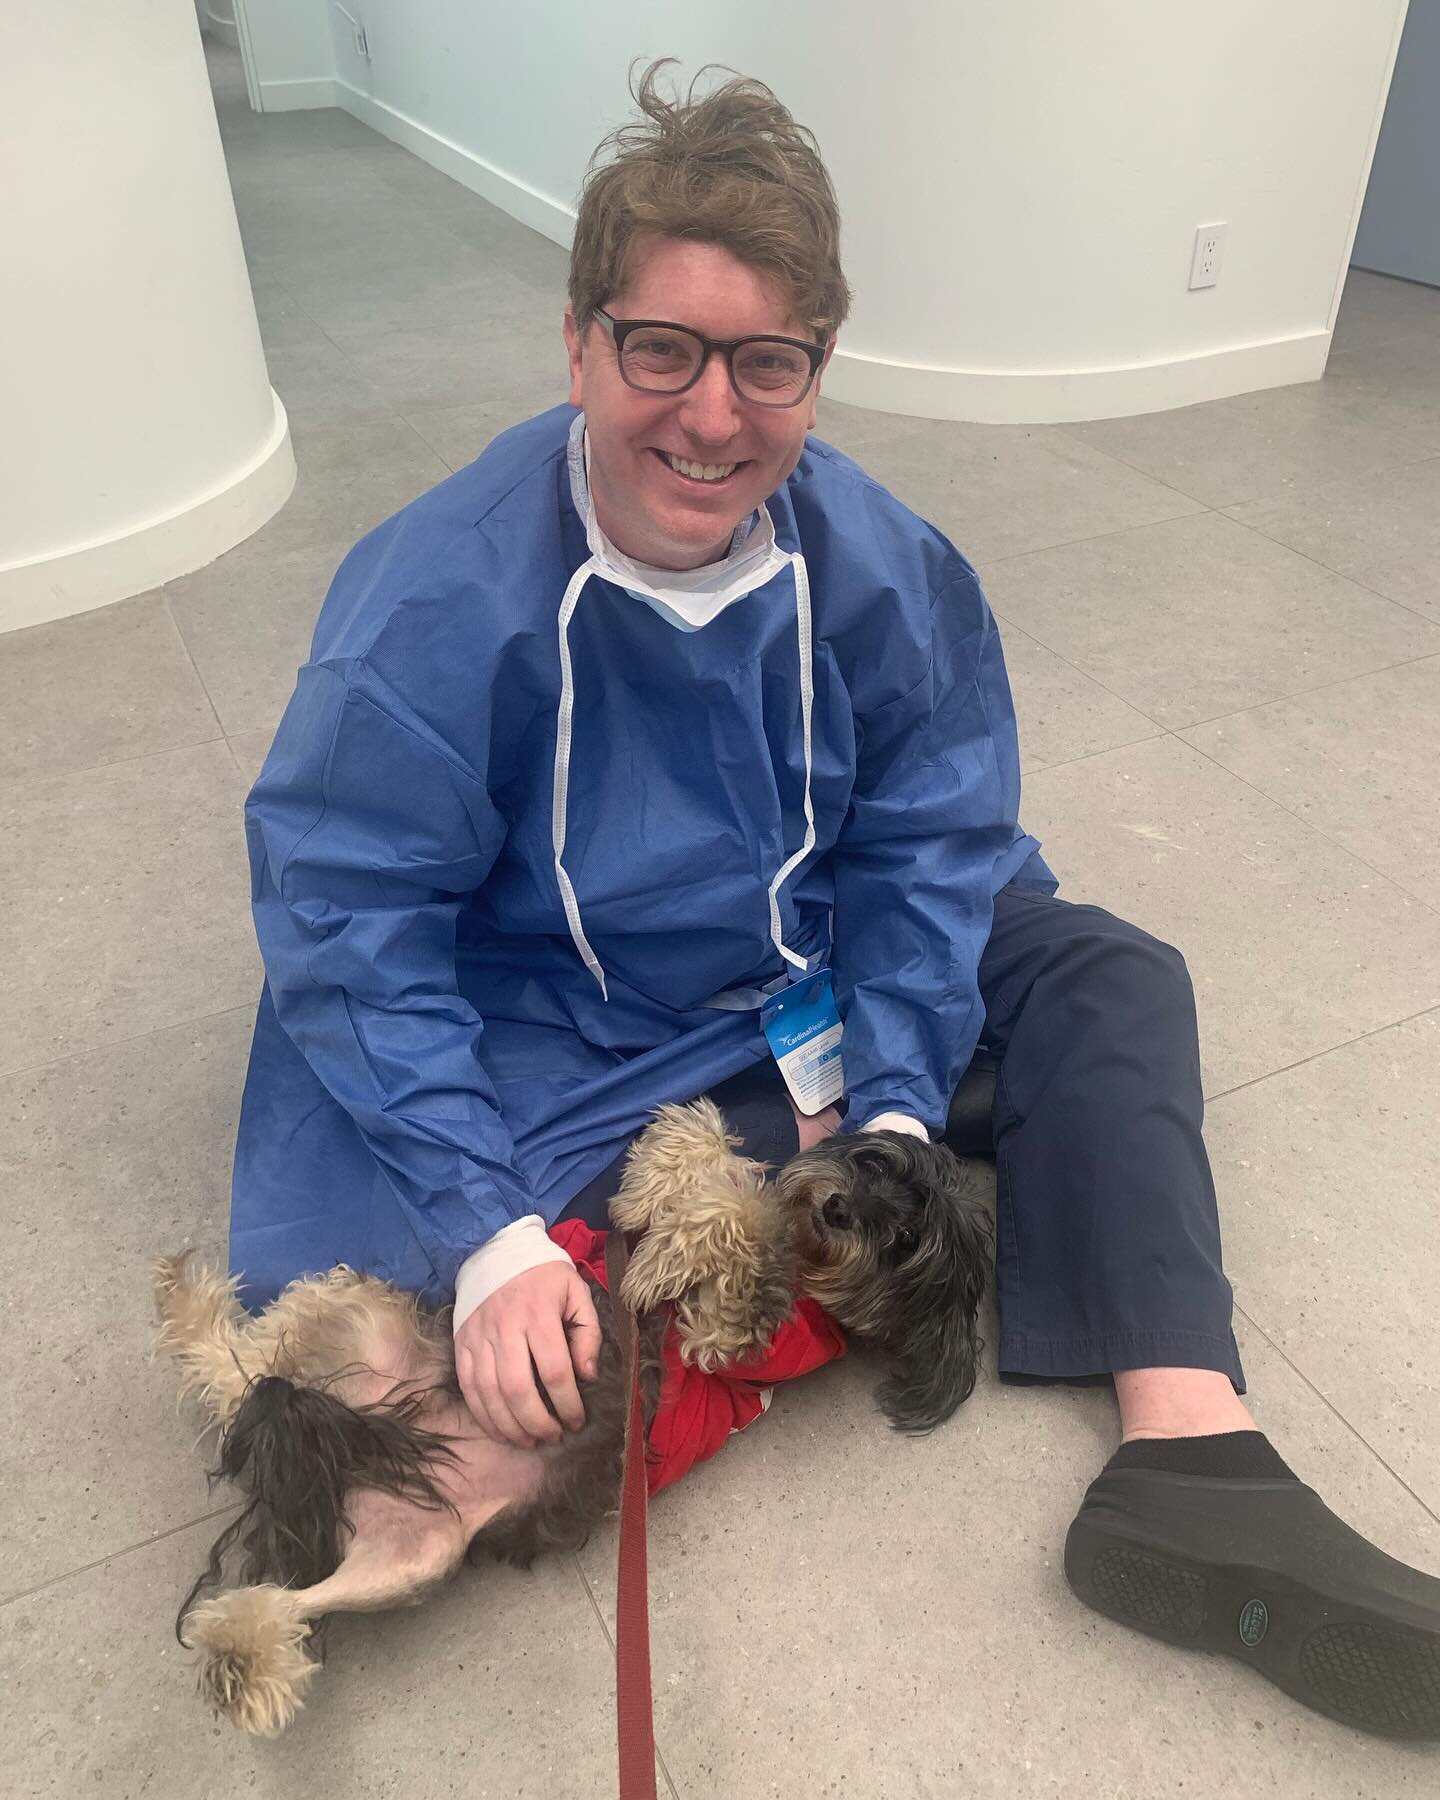 Dr. Kahn fixed Puddle&rsquo;s knee (ACL tear) 2 weeks ago. This week, Puddle arrived for his incision recheck appointment with his primary care vet Dr. Bayazit @brilliantvets while we were there for 2 other patients&rsquo; surgeries.

Dr. Kahn was av